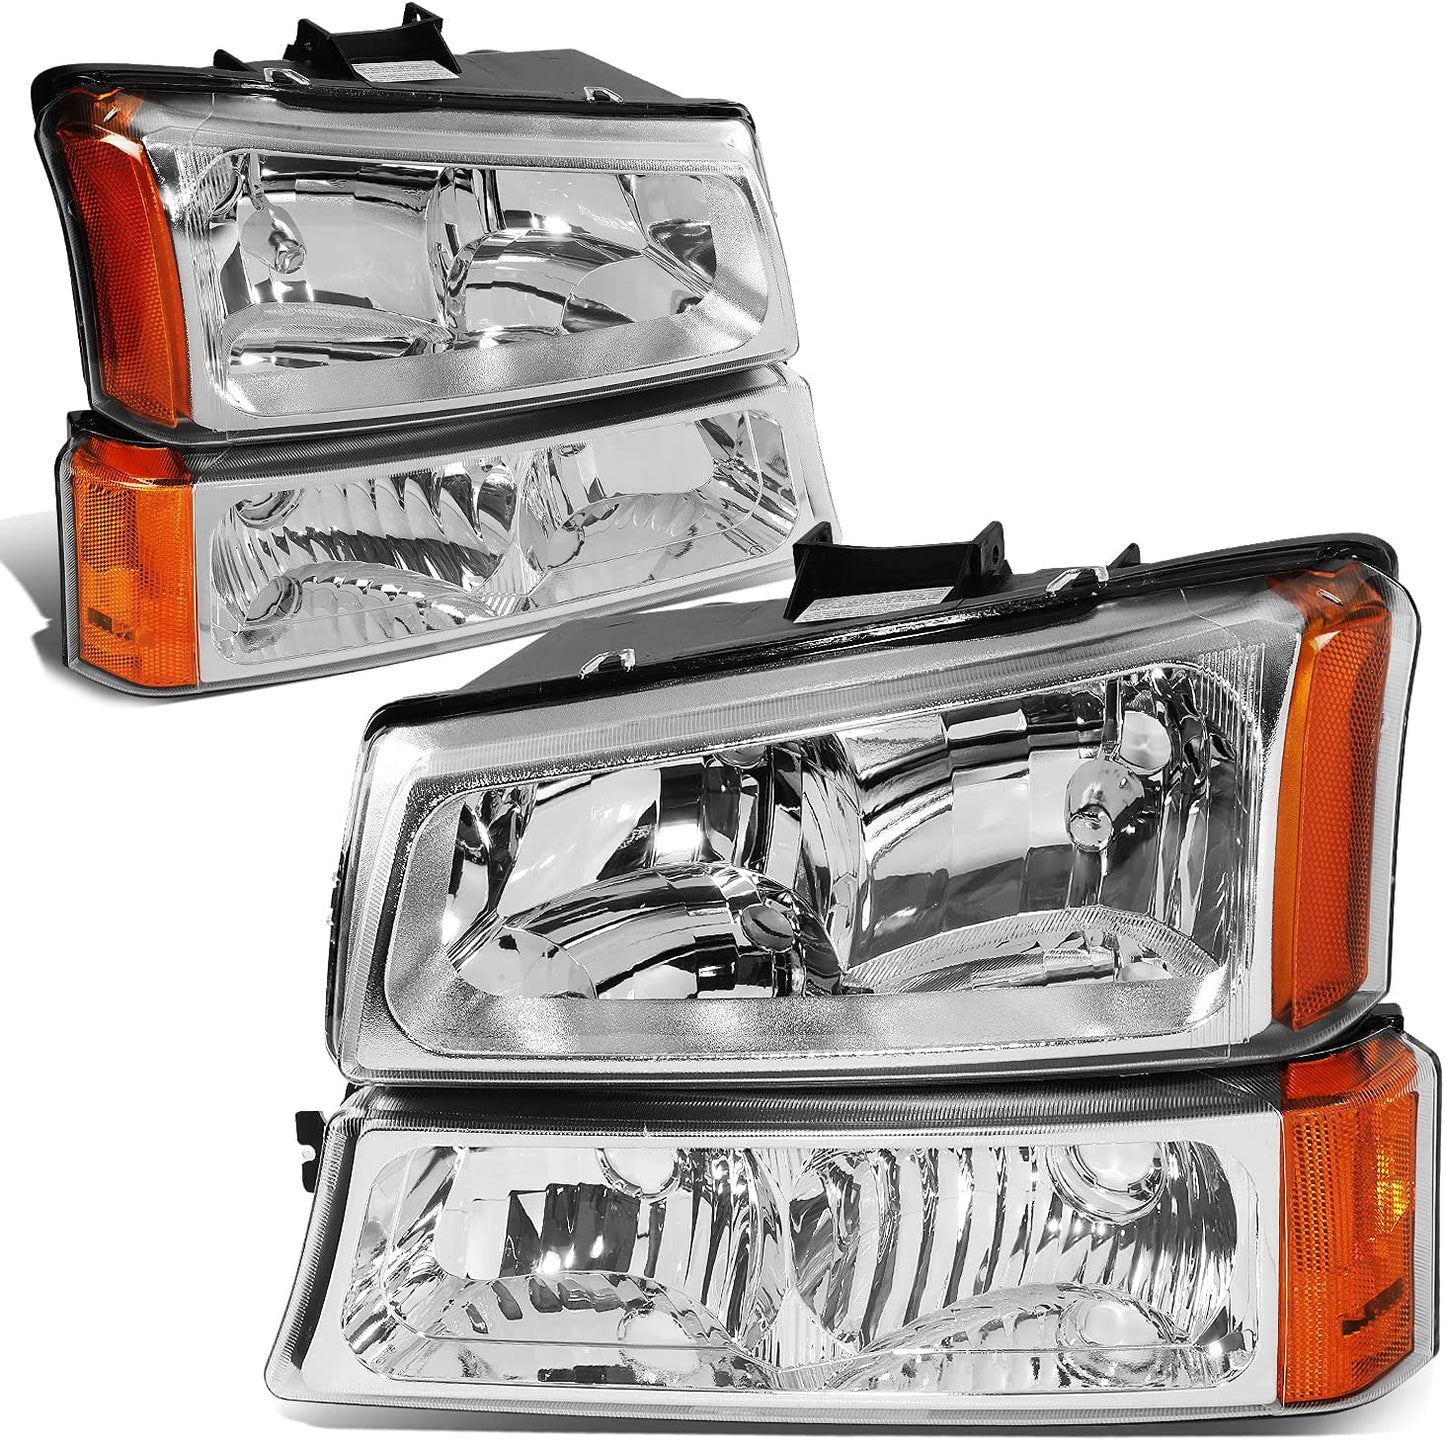 DNA Motoring HL-OH-CS03-4P-CH-AM Chrome Amber Headlights Compatible with 2003-2006 Chevy Silverado/Avalanche Chrome / Amber